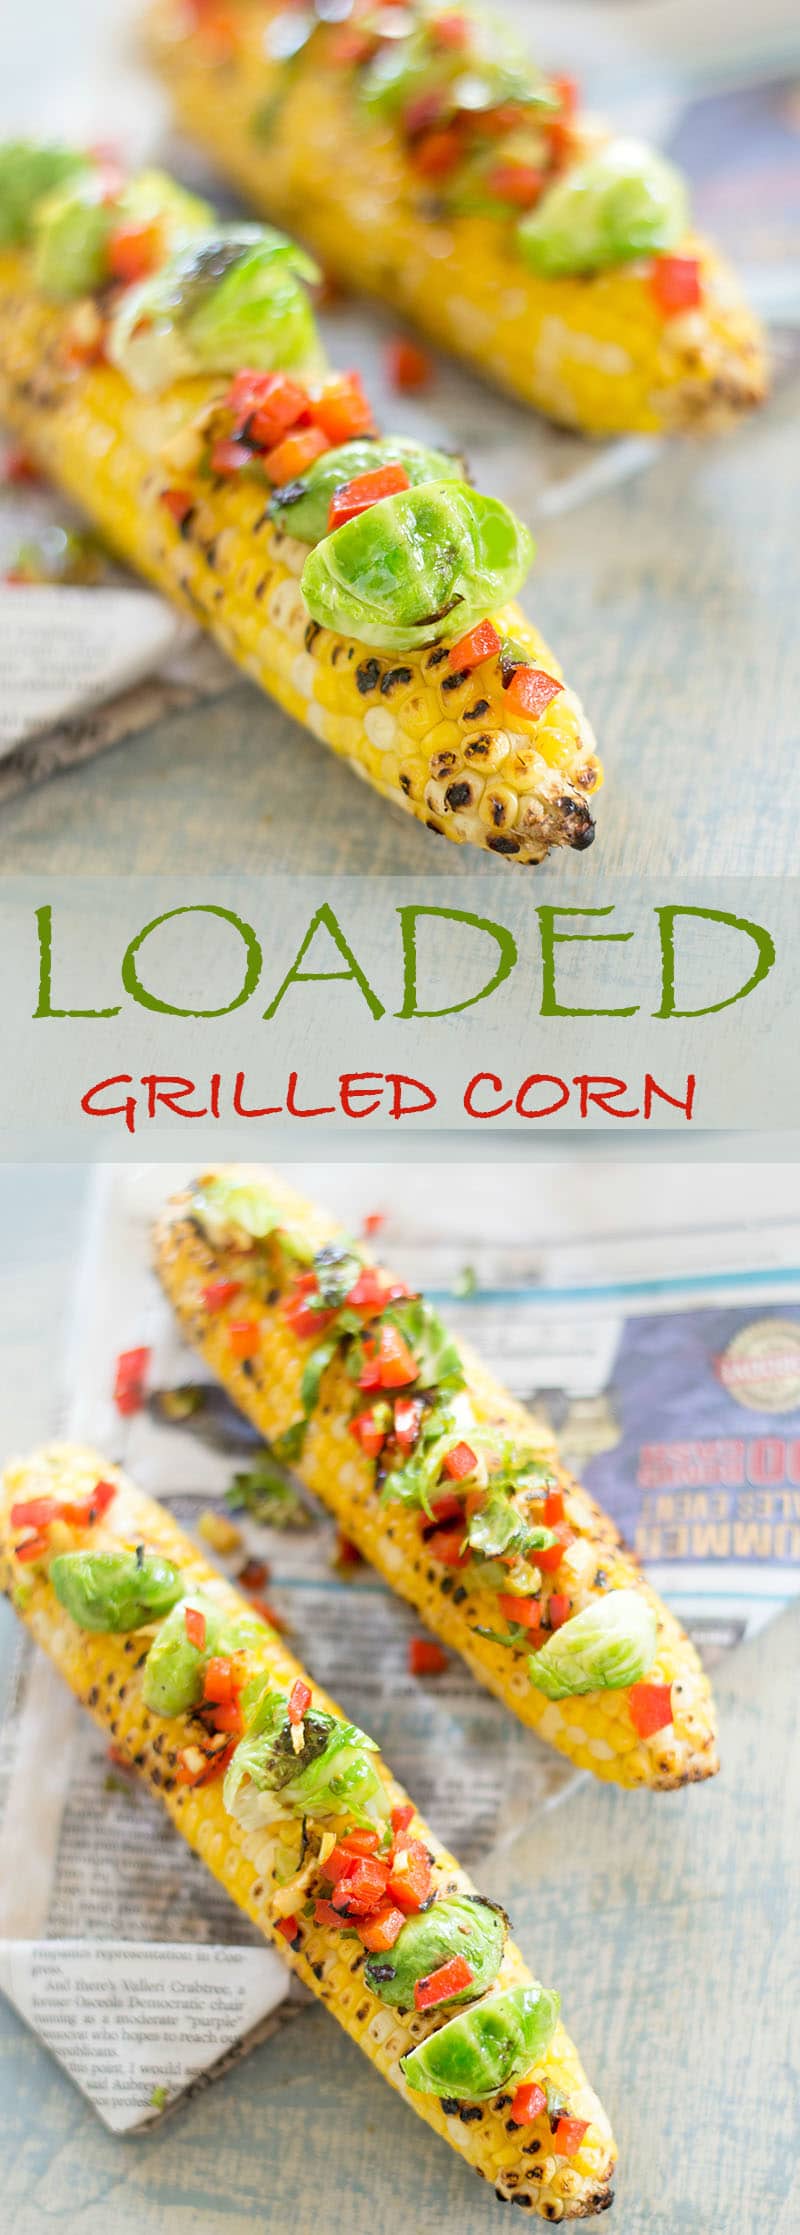 You have never had grilled corn recipe like this one. Summer grilling is fun with this corn and Brussels sprouts and red bell pepper salad Vegan, Vegetarian